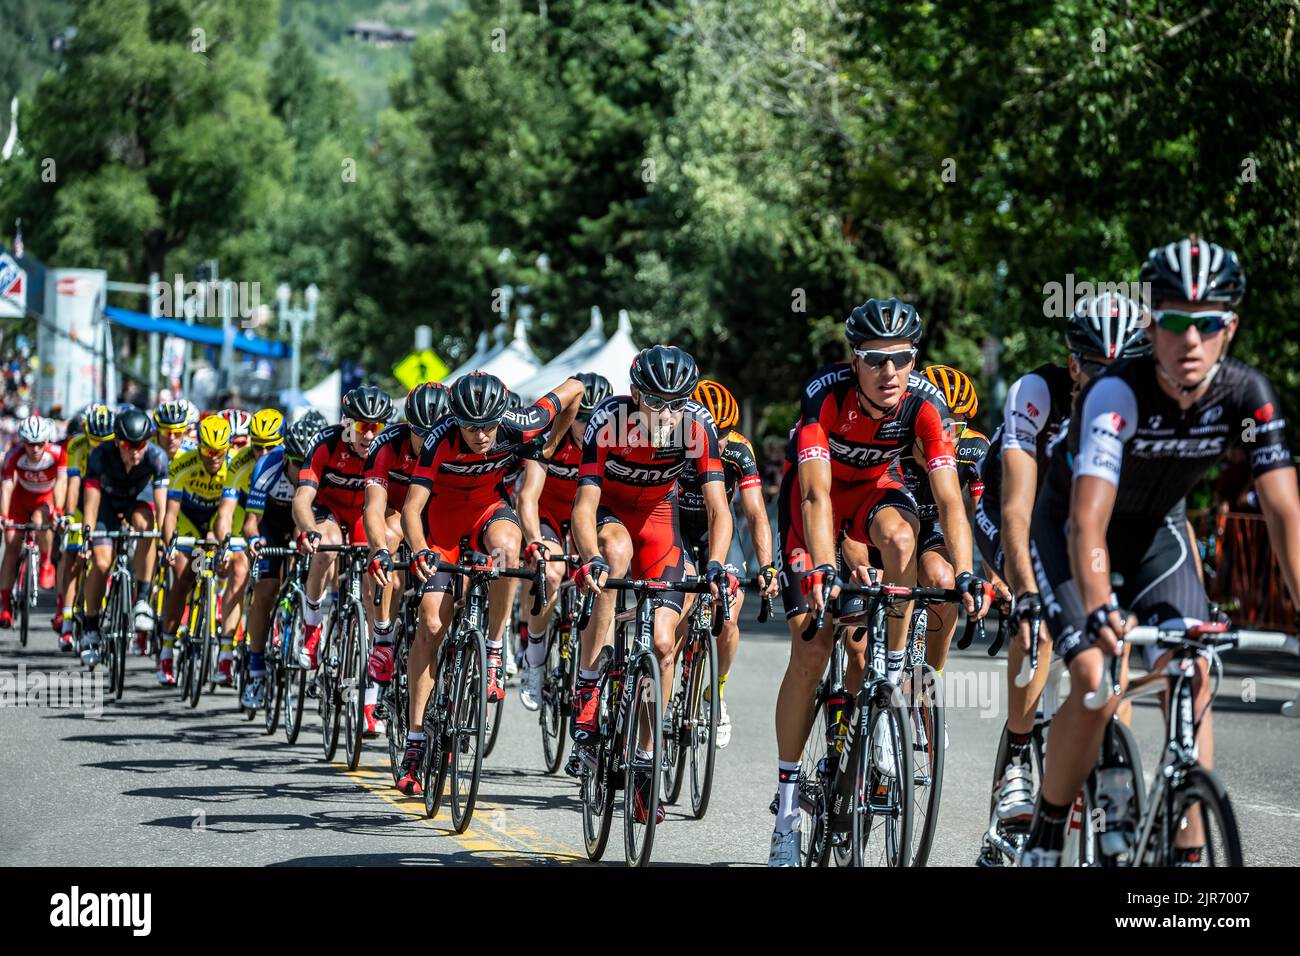 Bicycle riders, BMC riders in red jerseys, USA Pro Challenge bicycle race, Aspen, Colorado USA Stock Photo